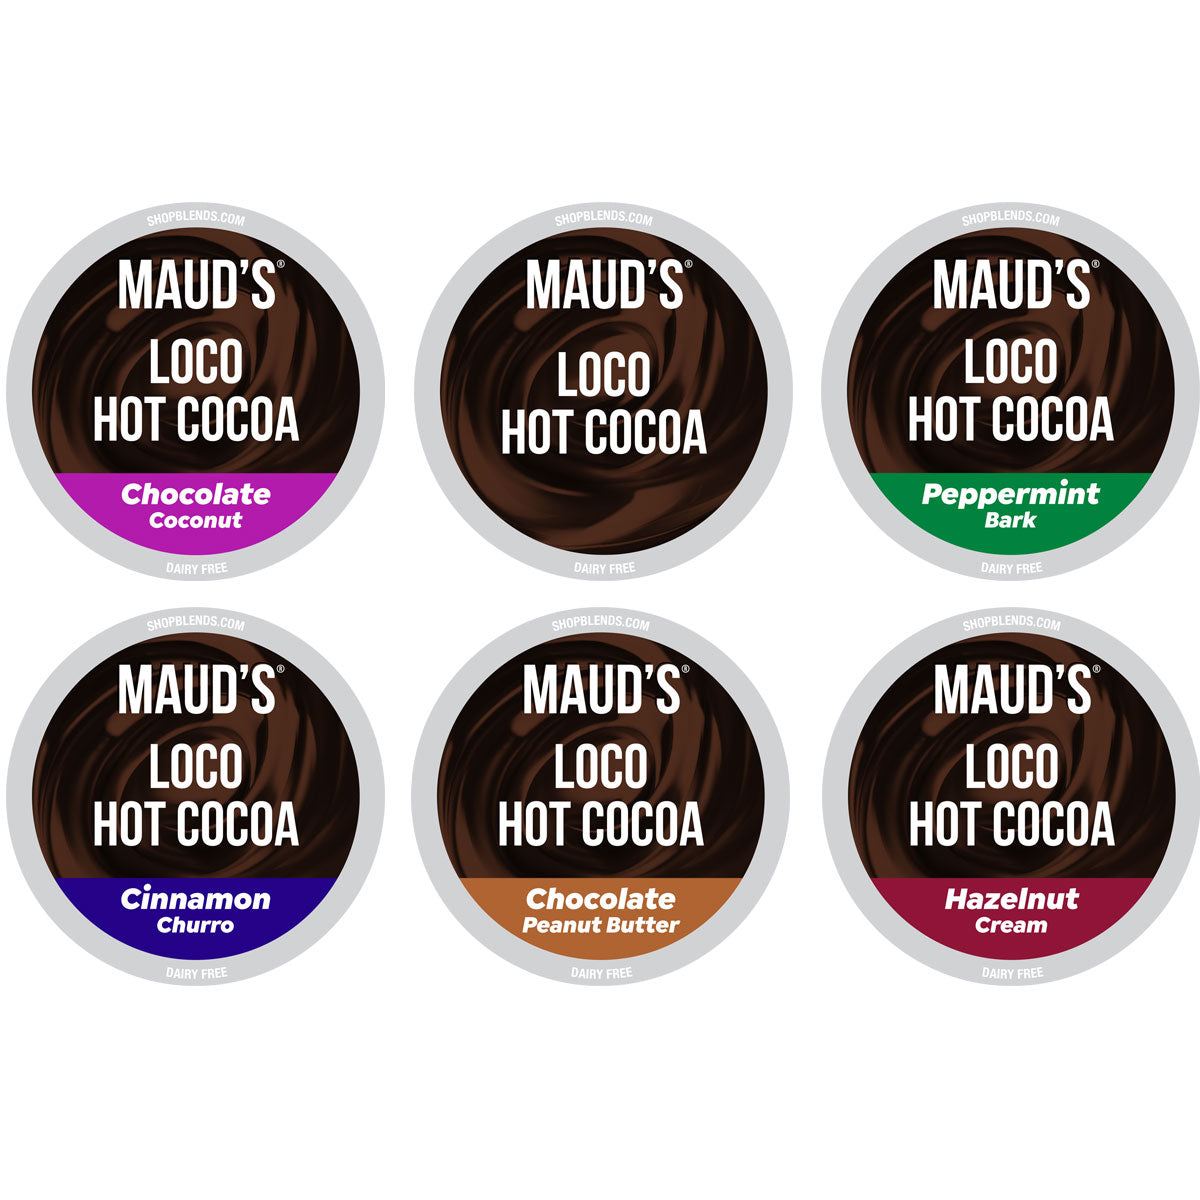 Maud's Flavored Hot Chocolate Variety Pack (6 Flavors) - 48ct